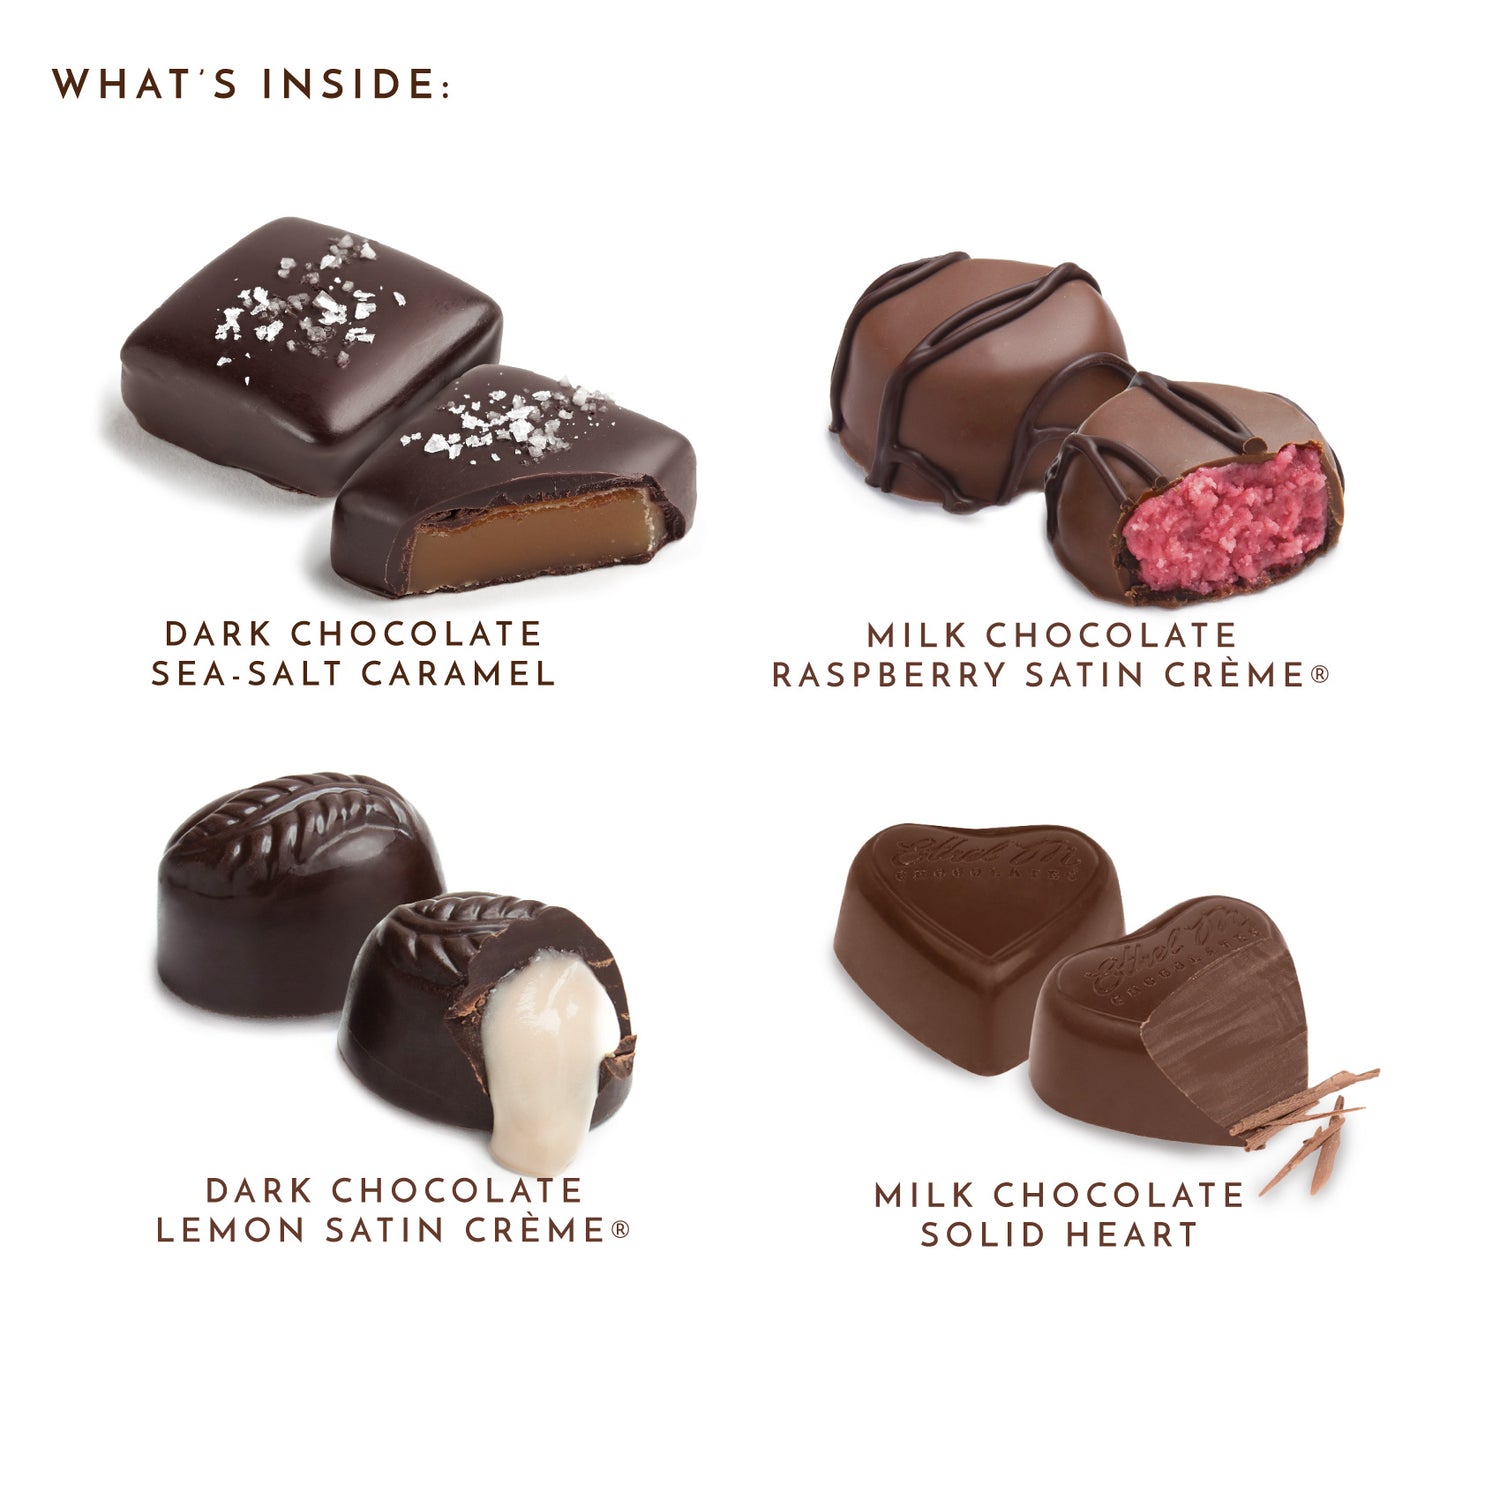 See's Candies, Two $25 Gift Cards